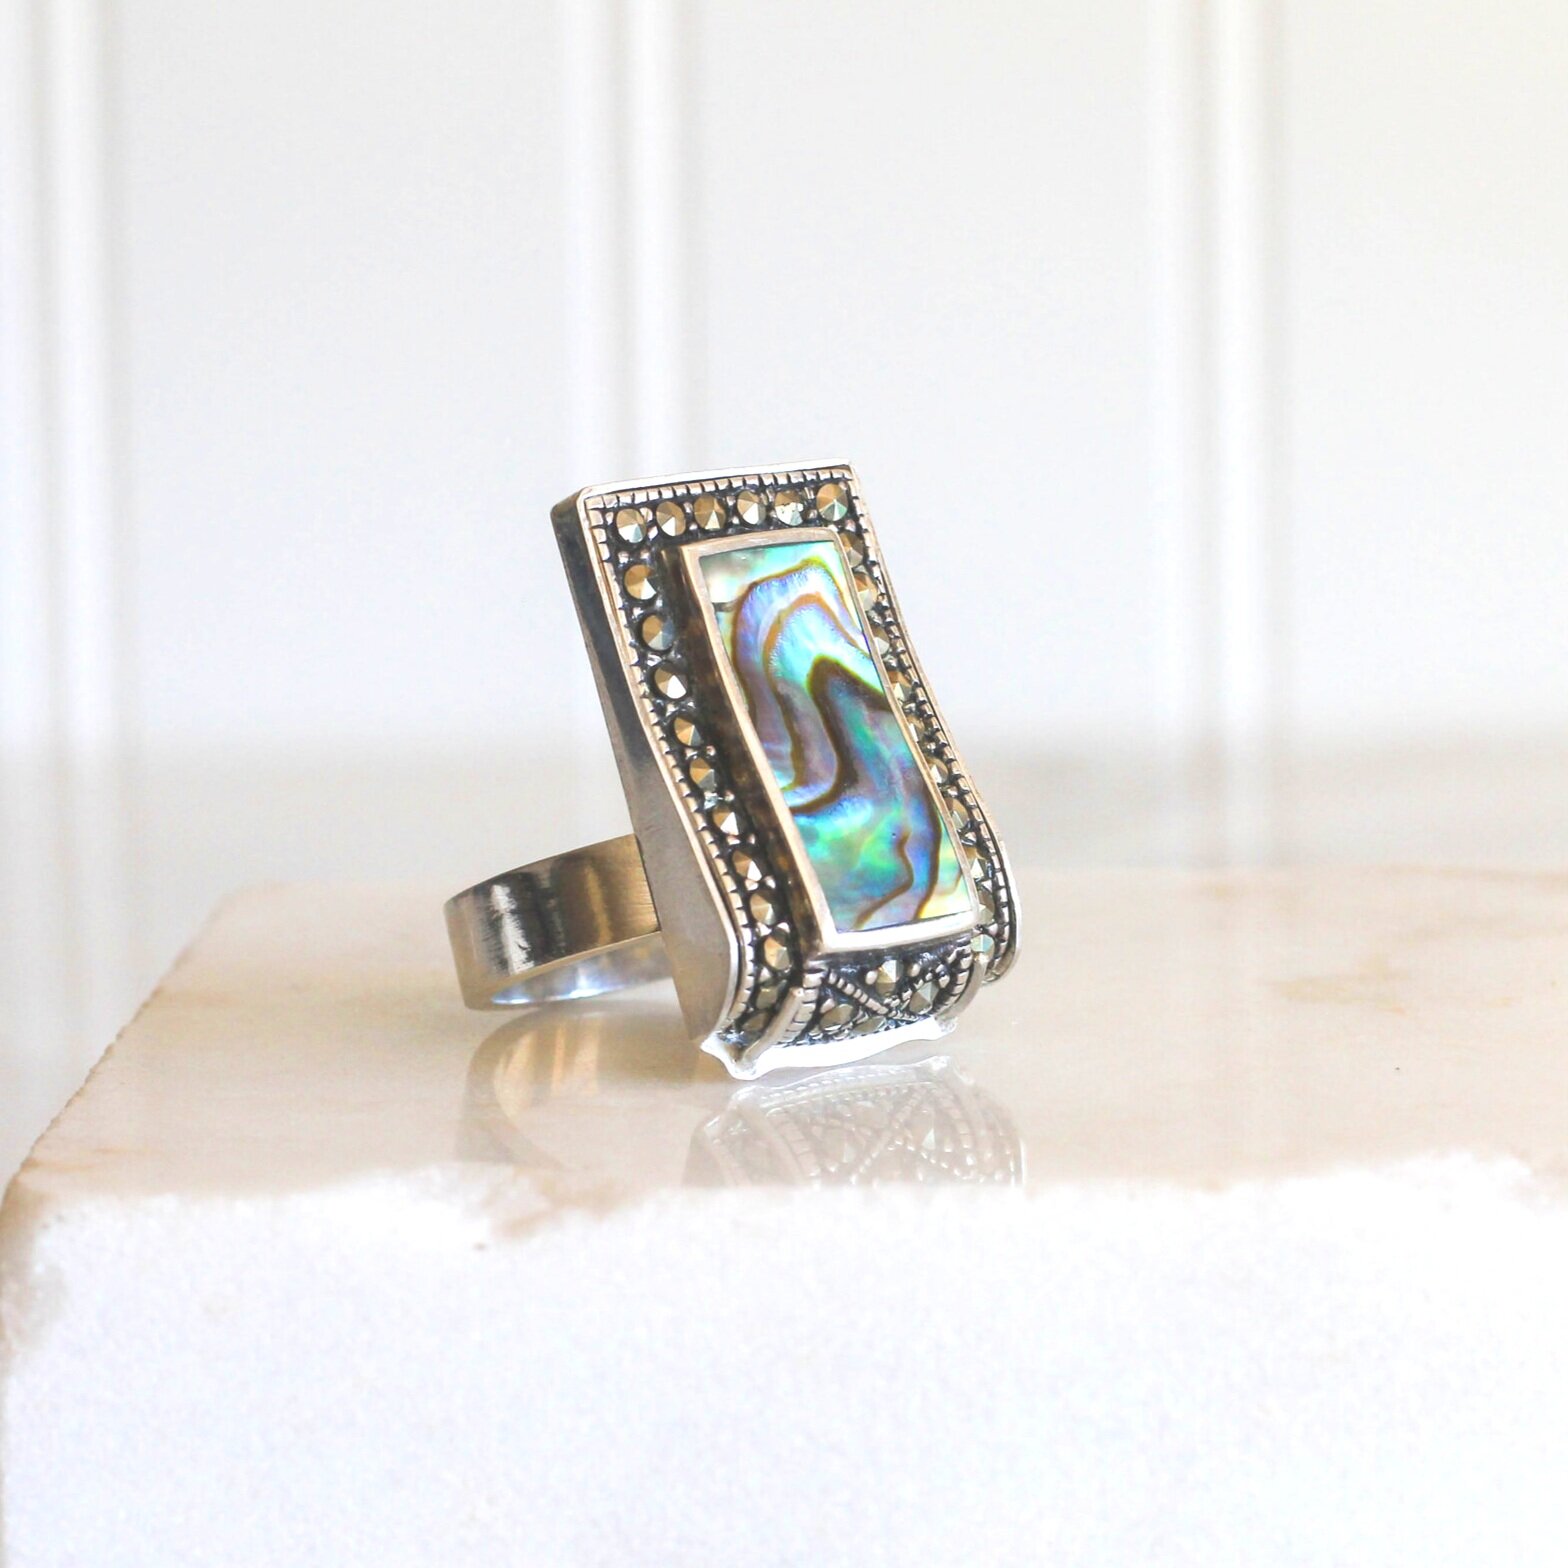 New Heirloom Abalone Ring